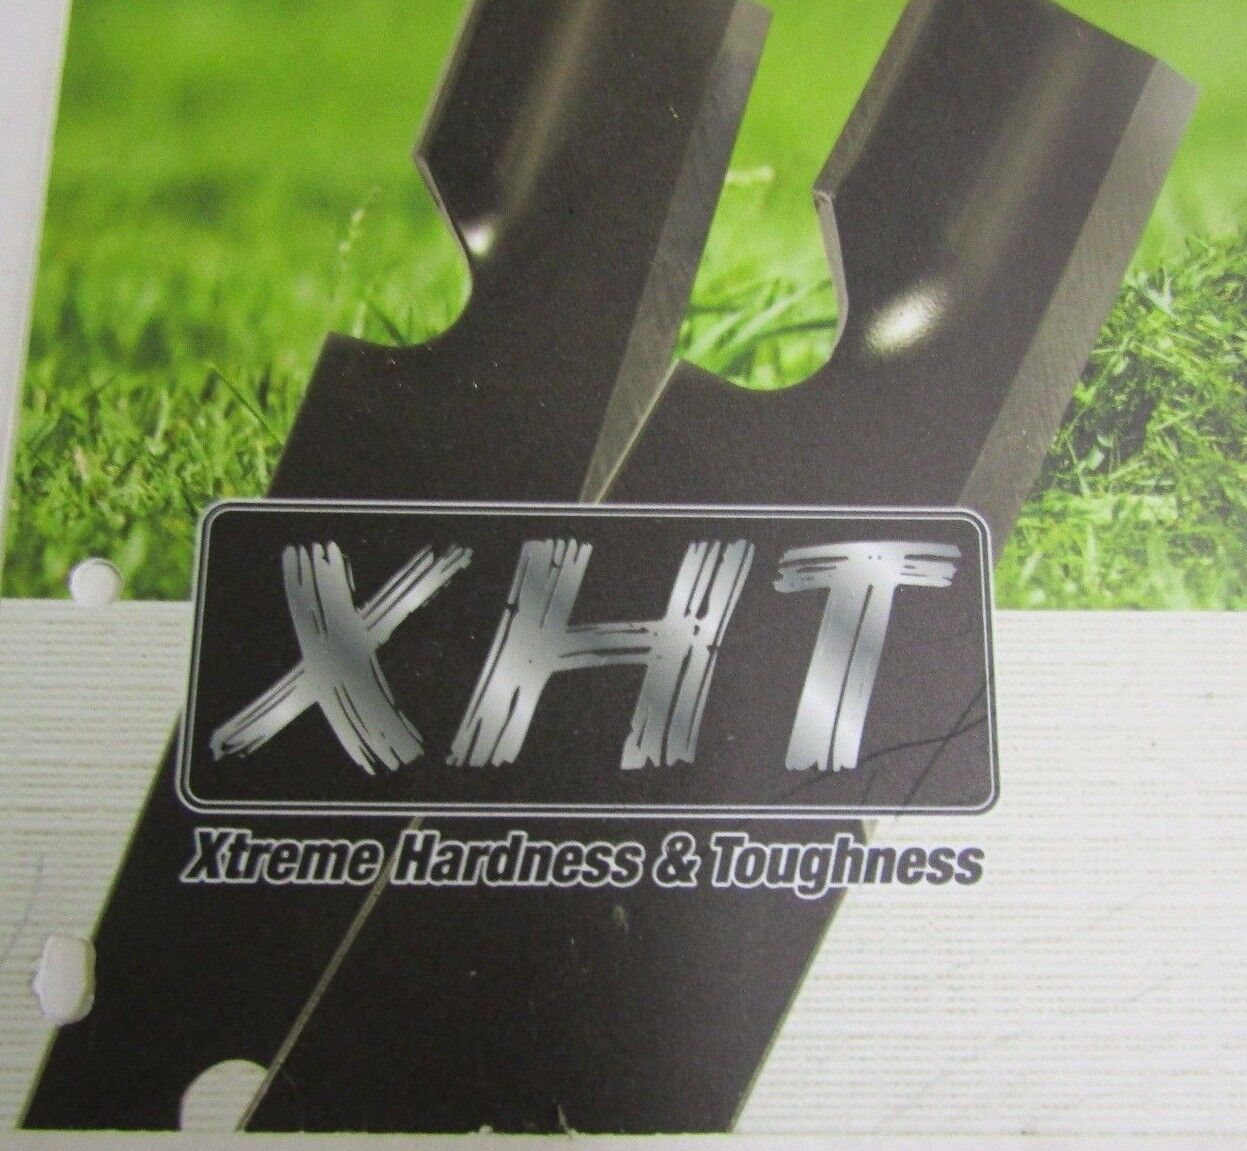 3 USA XHT blades will fit JOHN DEERE M86209 AM39966 M76461 with 50" DECK